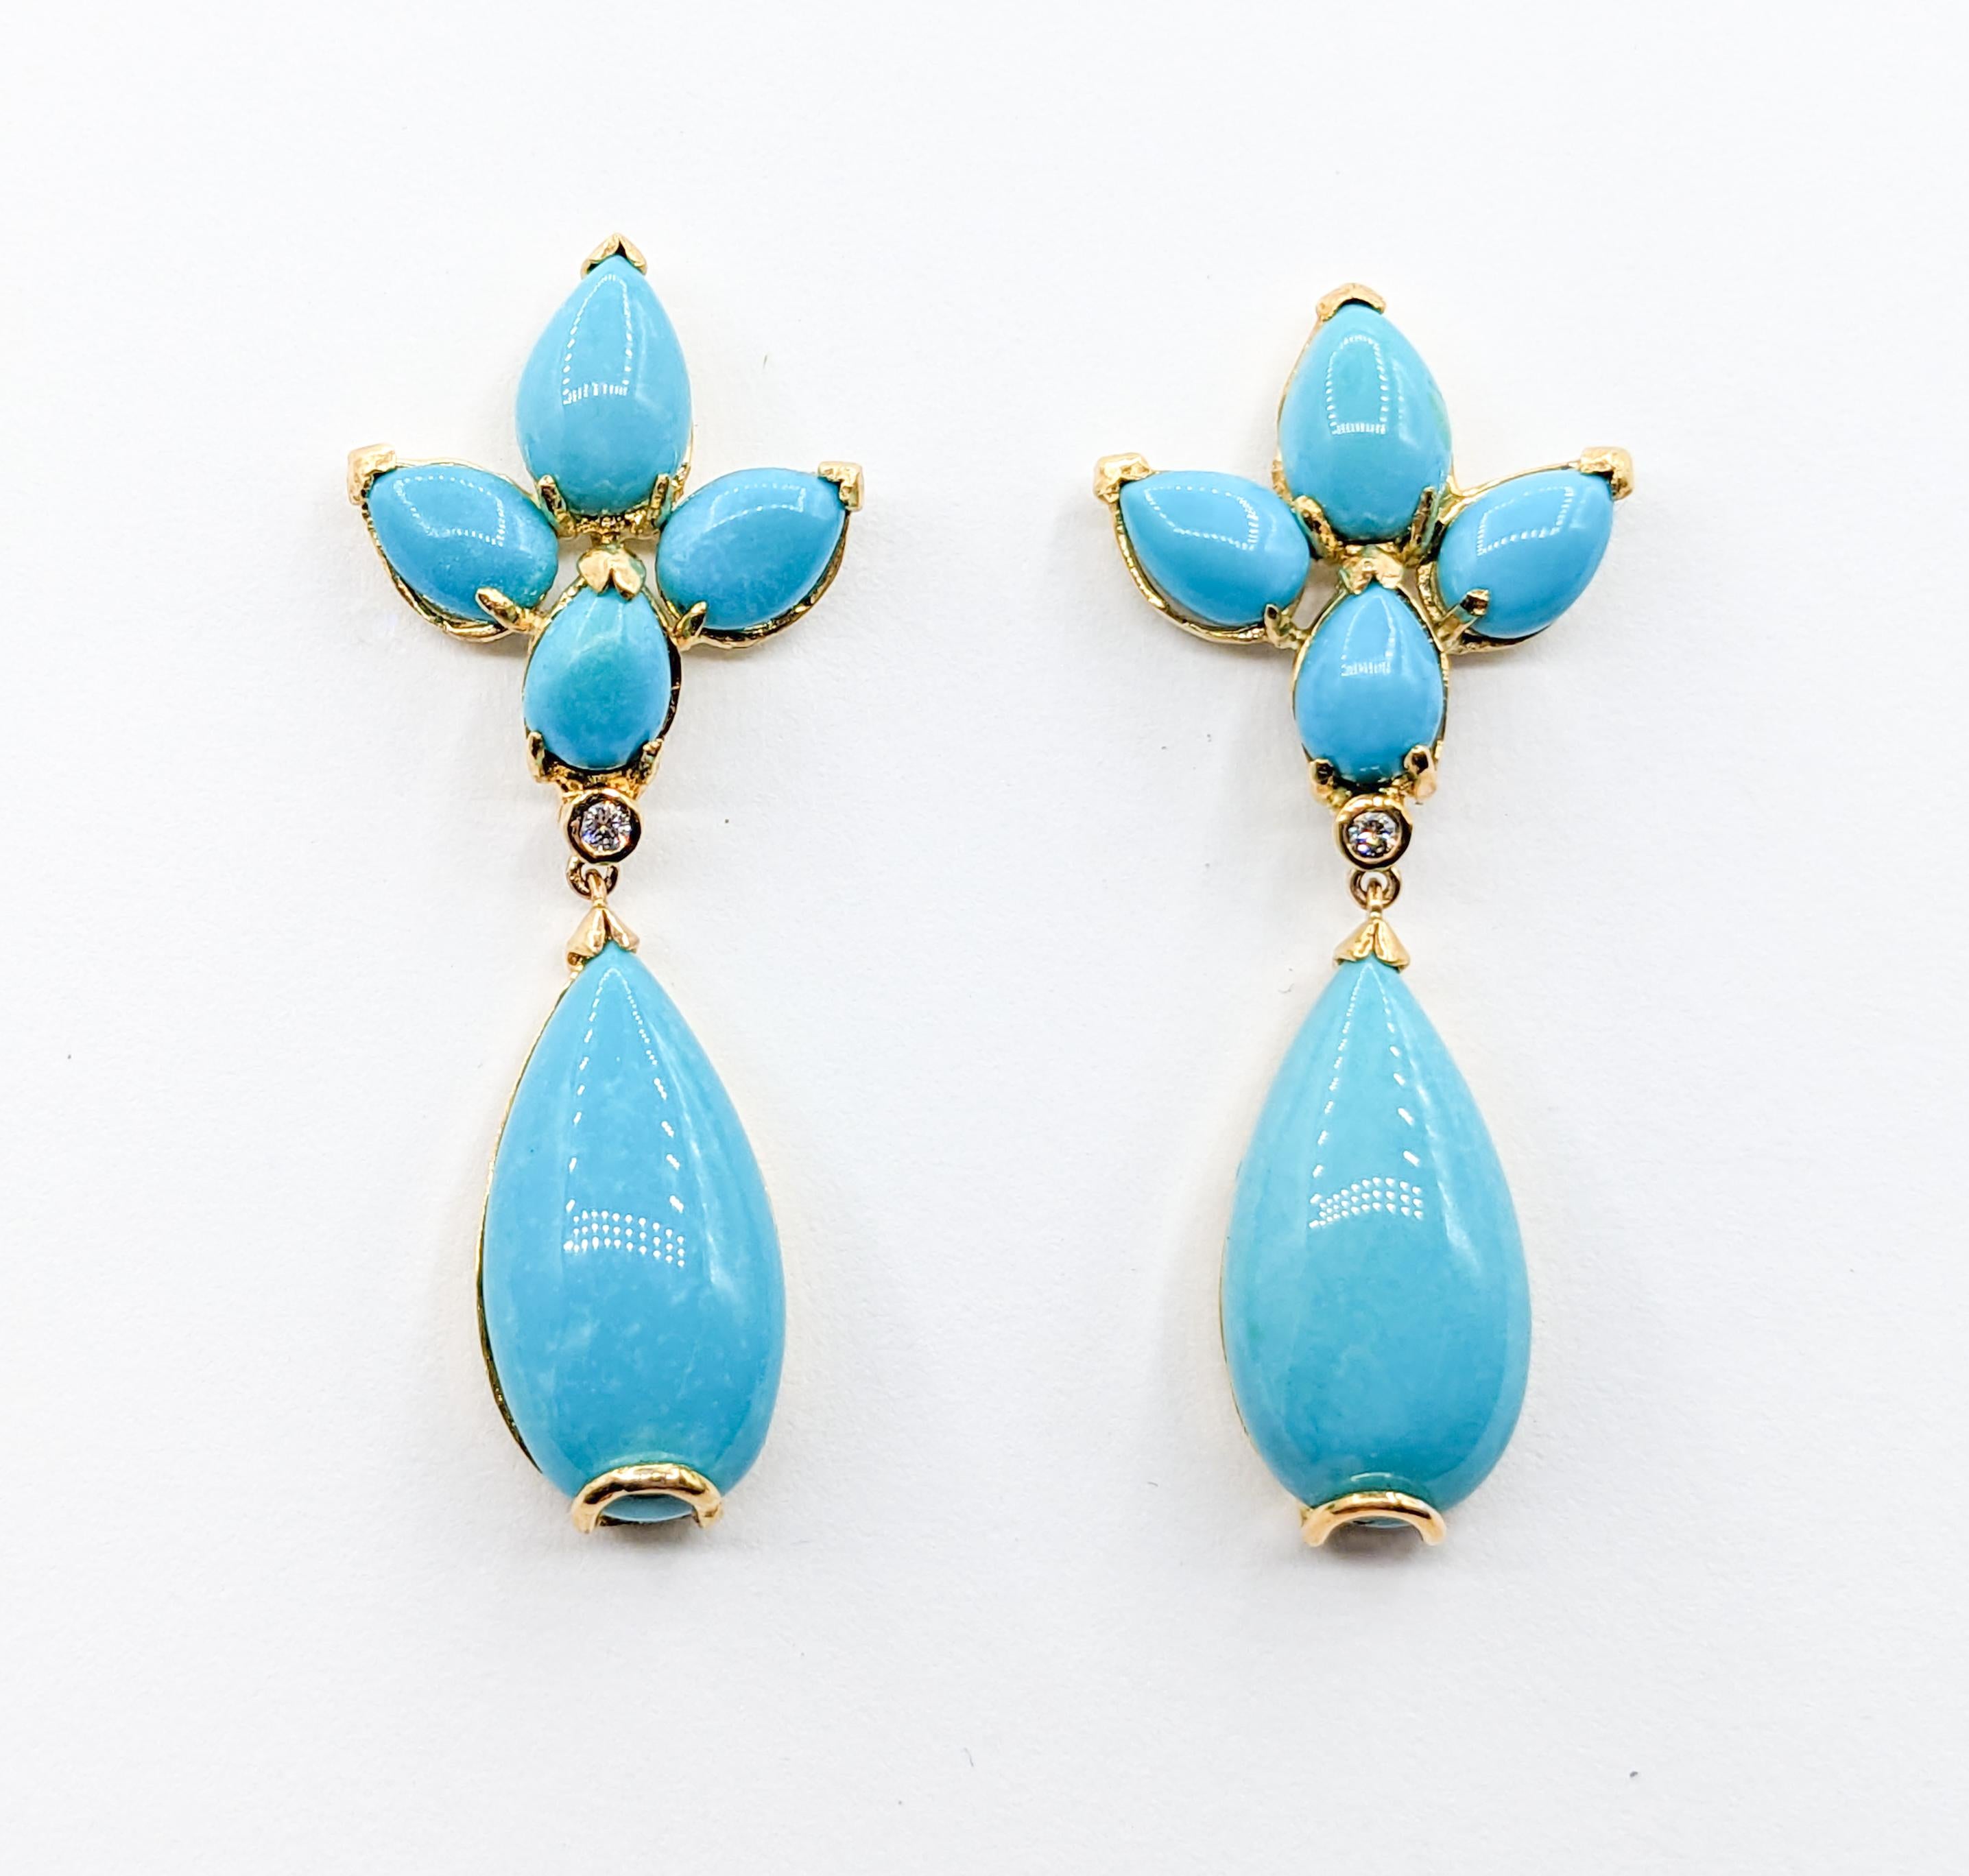 Turquoise & Diamond Statement Earrings in Gold In Excellent Condition For Sale In Bloomington, MN